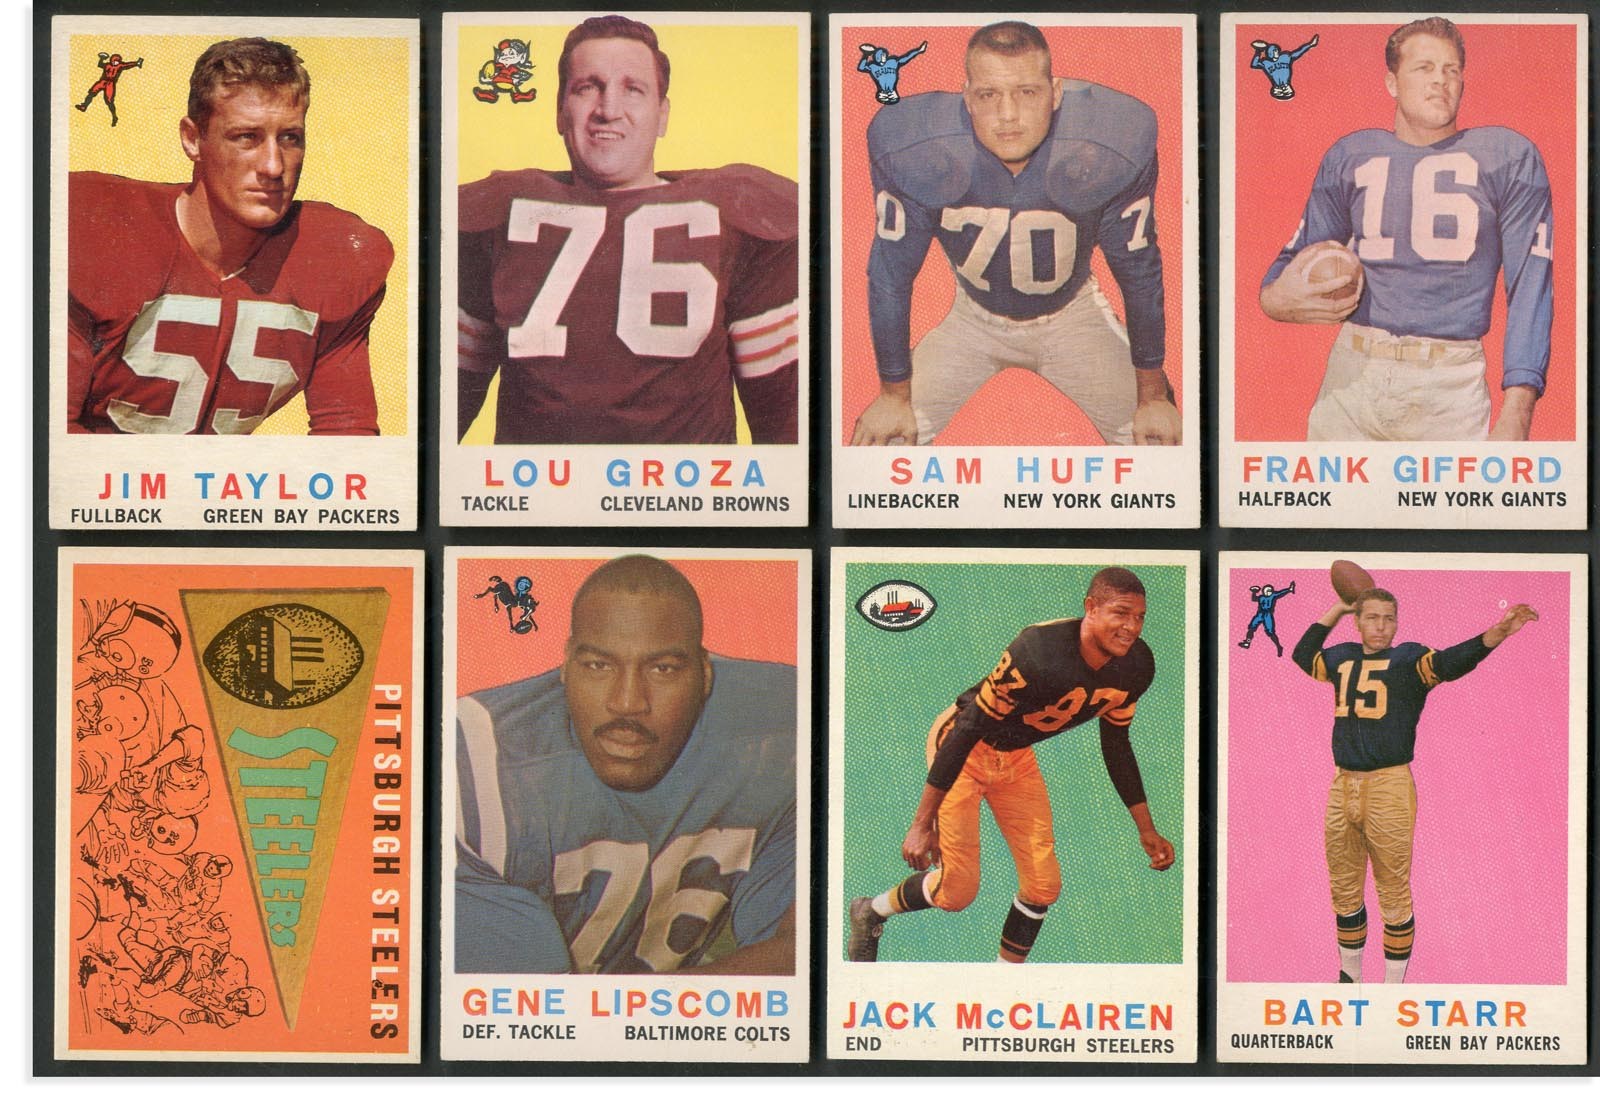 Baseball and Trading Cards - 1959 Topps Football Near Complete Set (174/176)